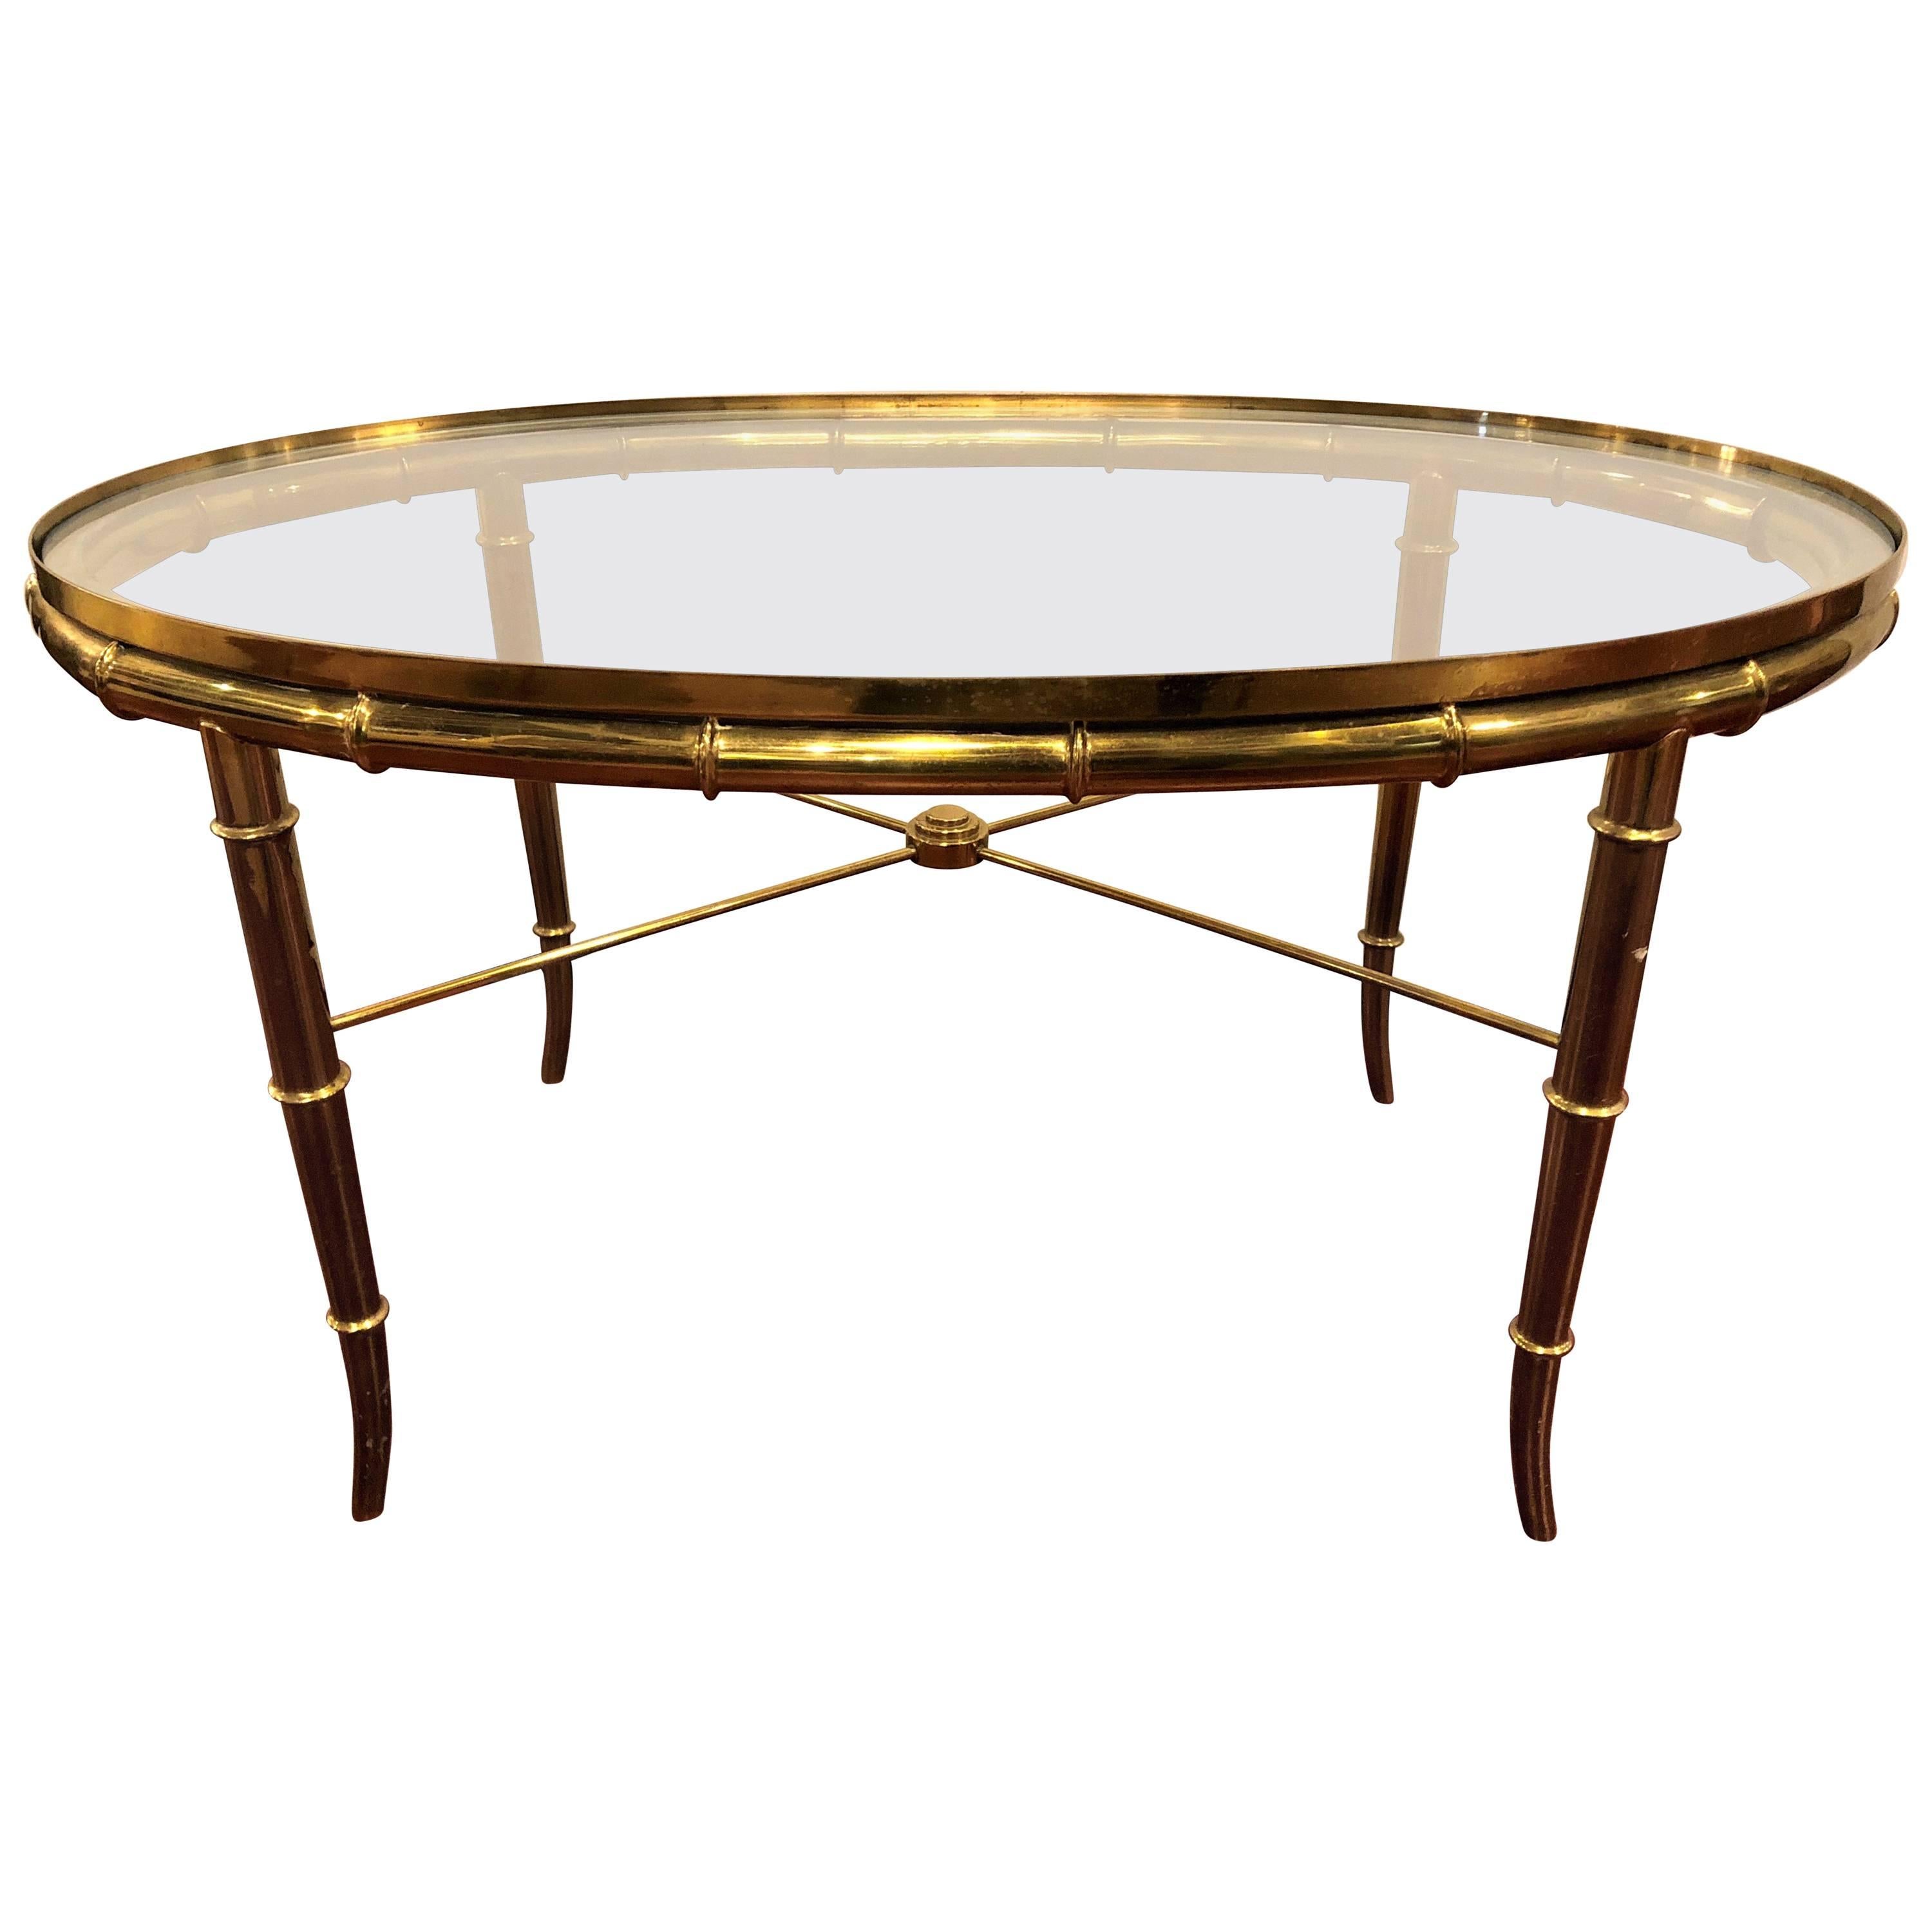 Hollywood Regency Style Gilt Metal Faux Bamboo Oval Glass Top Coffee Table